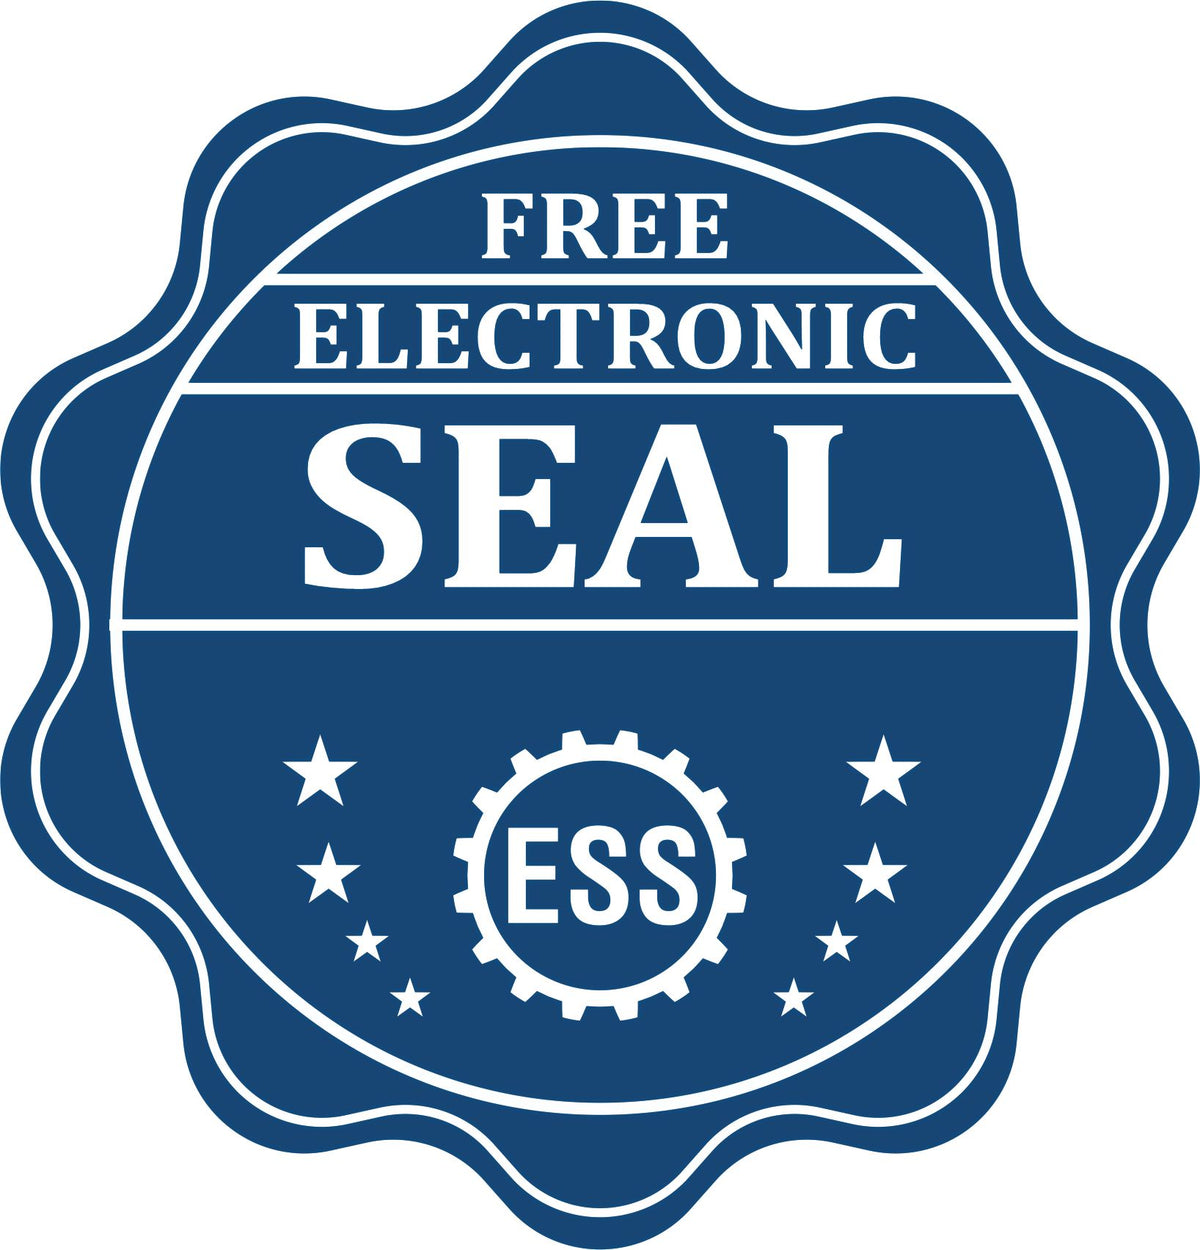 A badge showing a free electronic seal for the Slim Pre-Inked Nevada Land Surveyor Seal Stamp with stars and the ESS gear on the emblem.